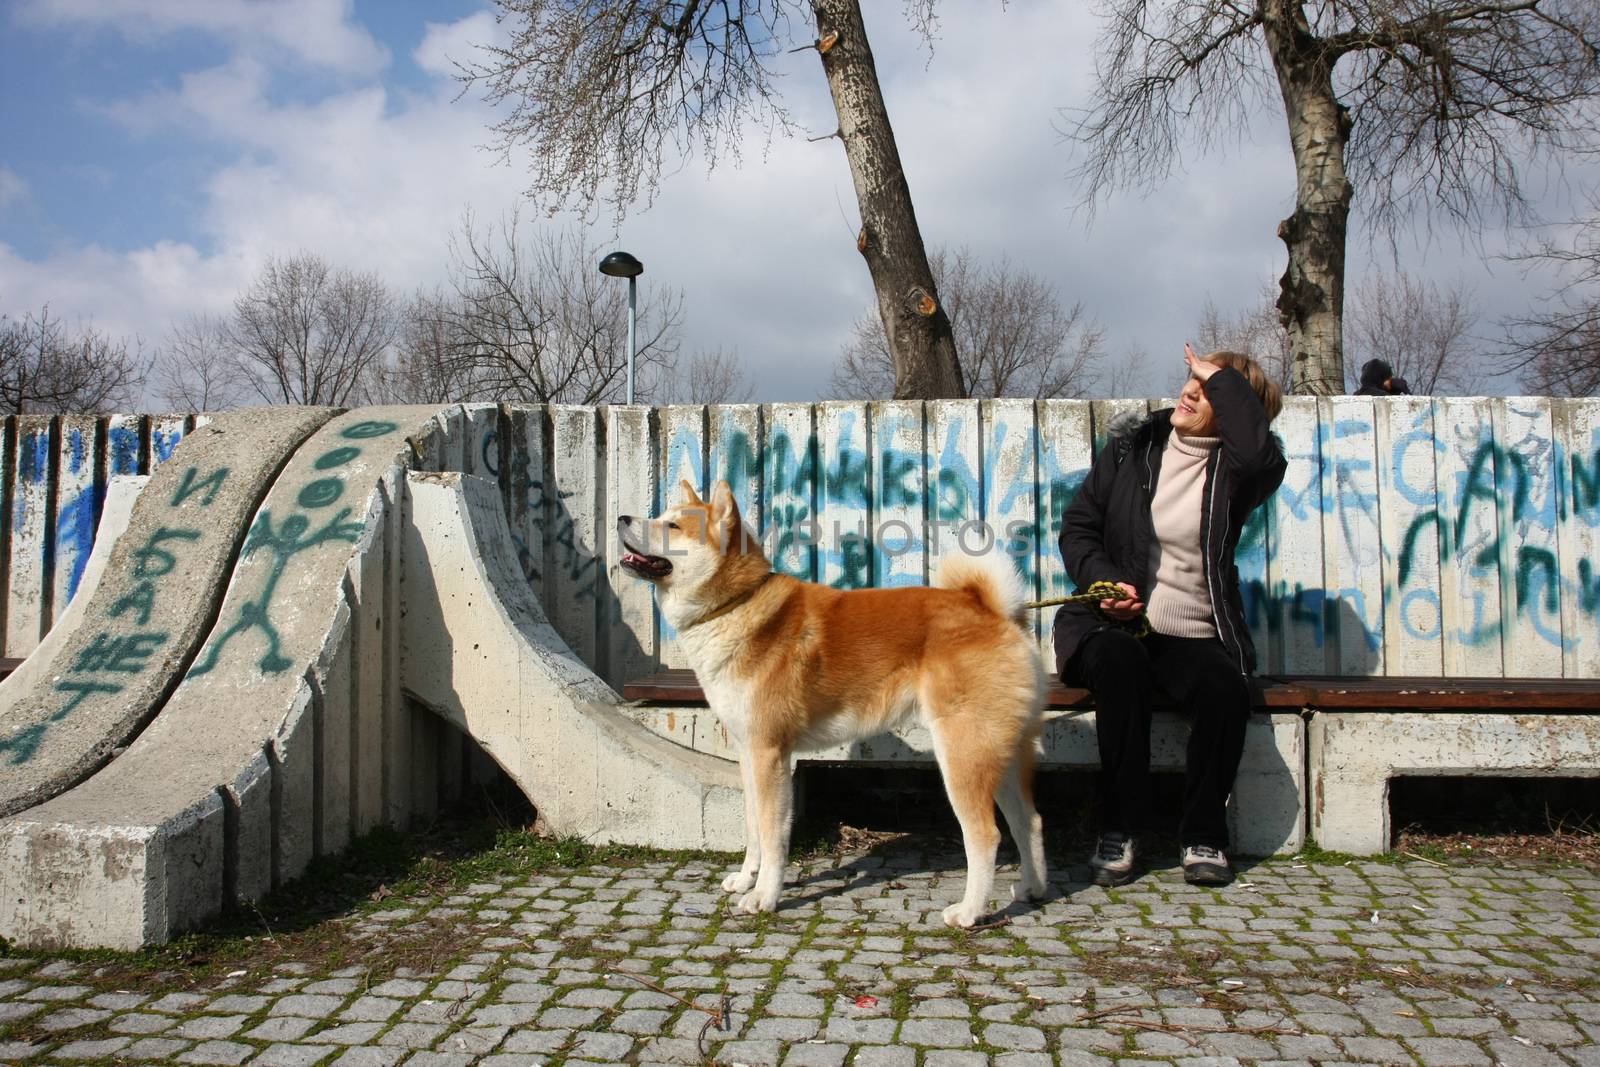 Lady with Akita Inu watch overflight sitting in front of graffiti